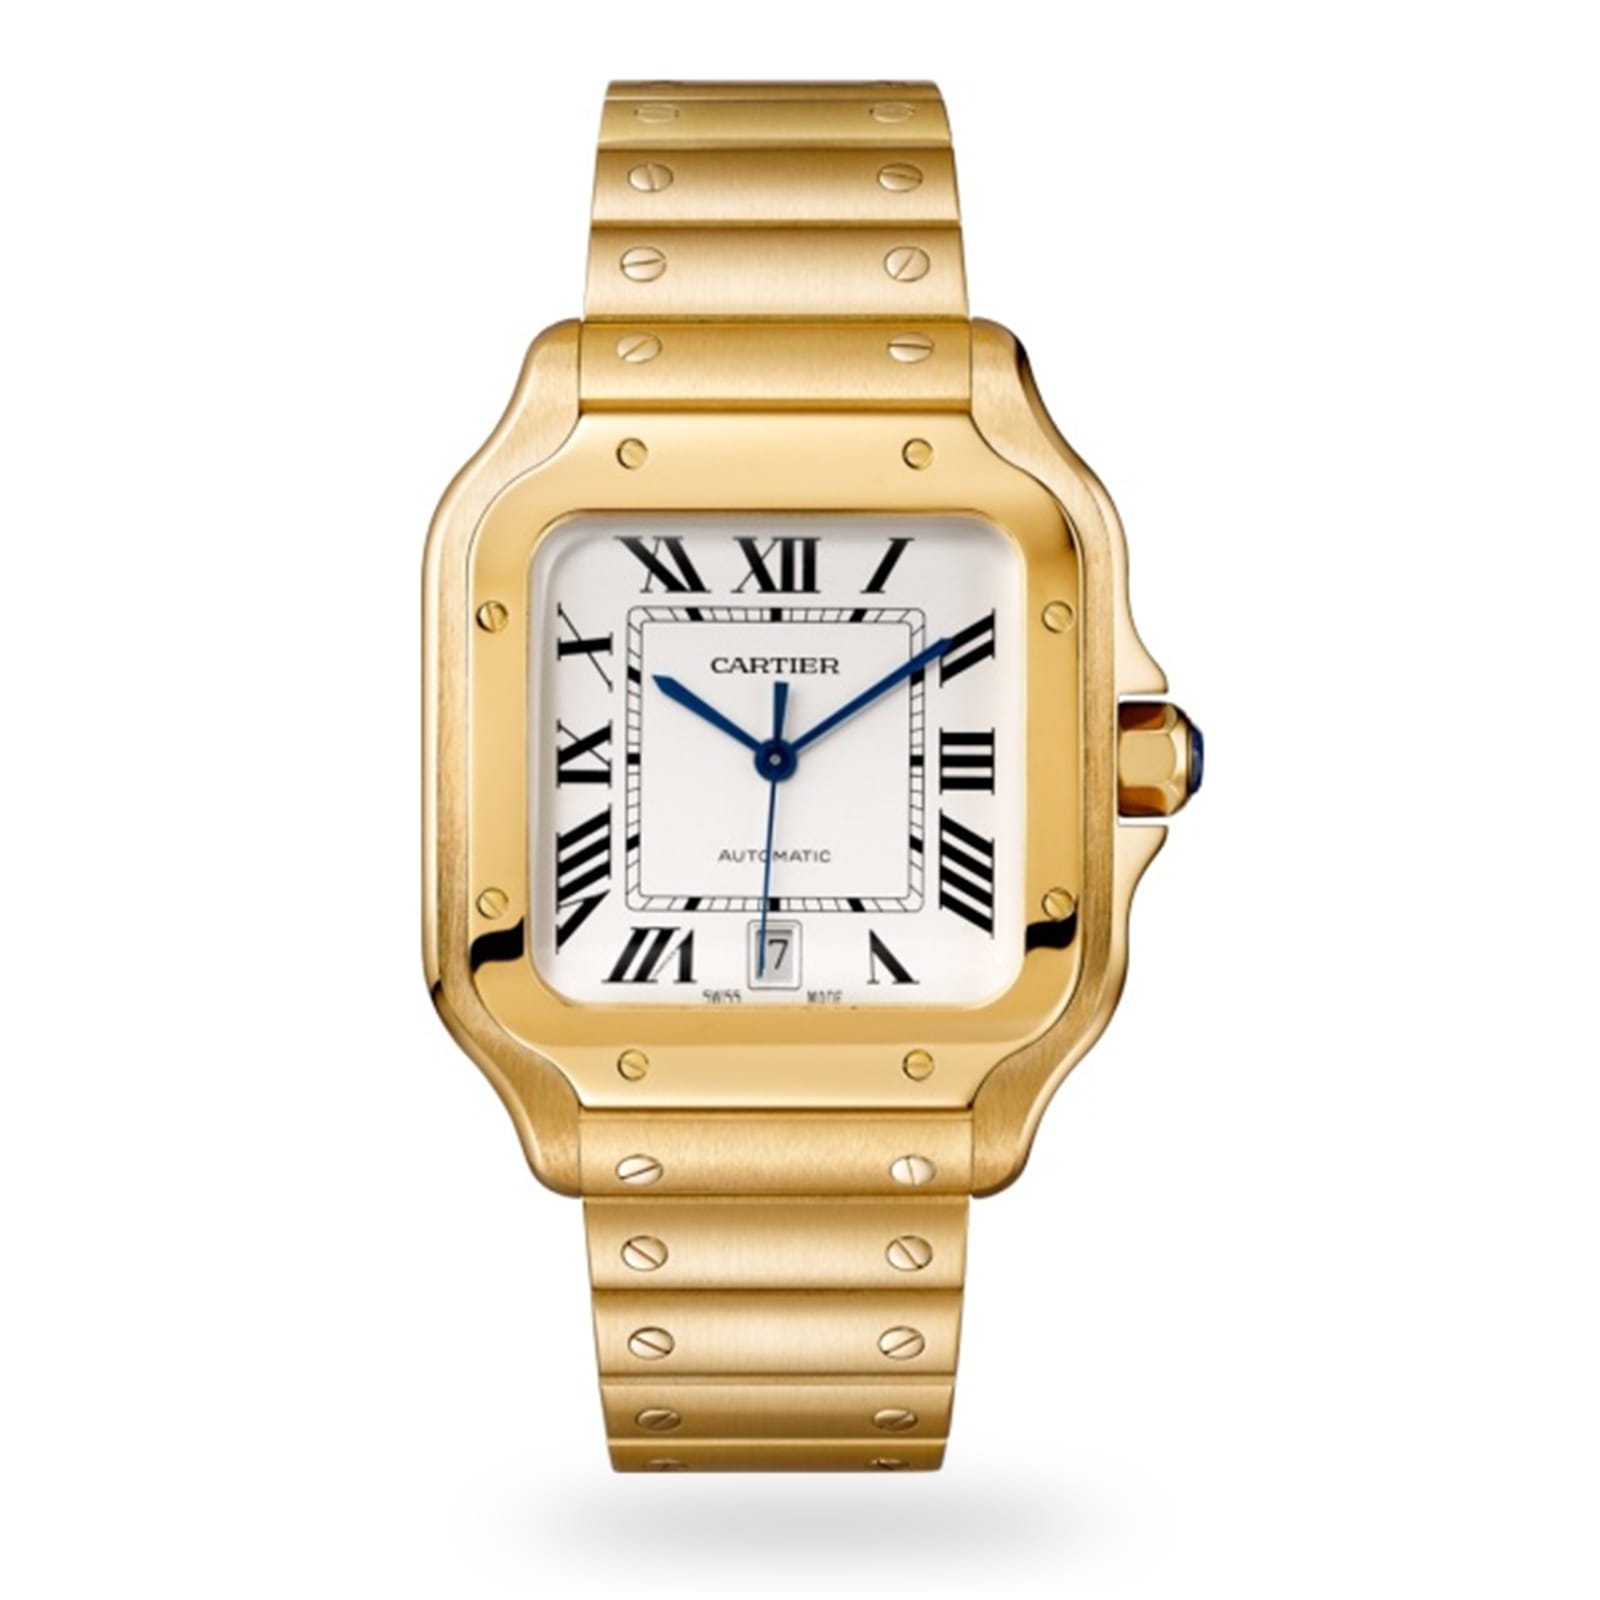 who owns cartier watches